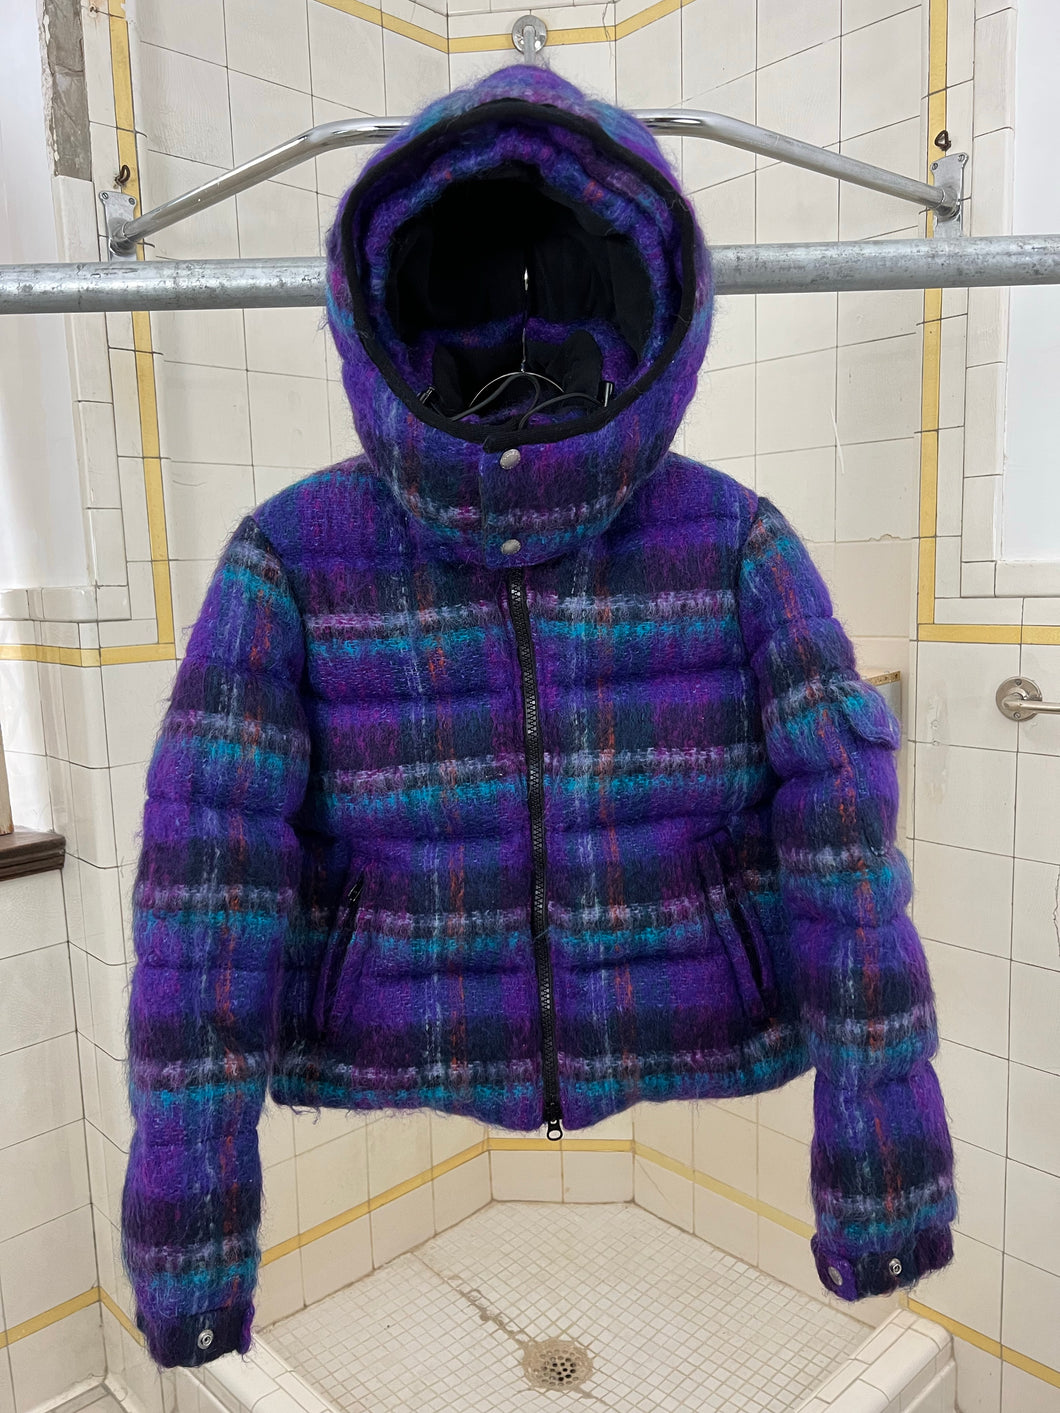 2014 Junya Watanabe Mohair Puffer Jacket with Removable Hood - Size S